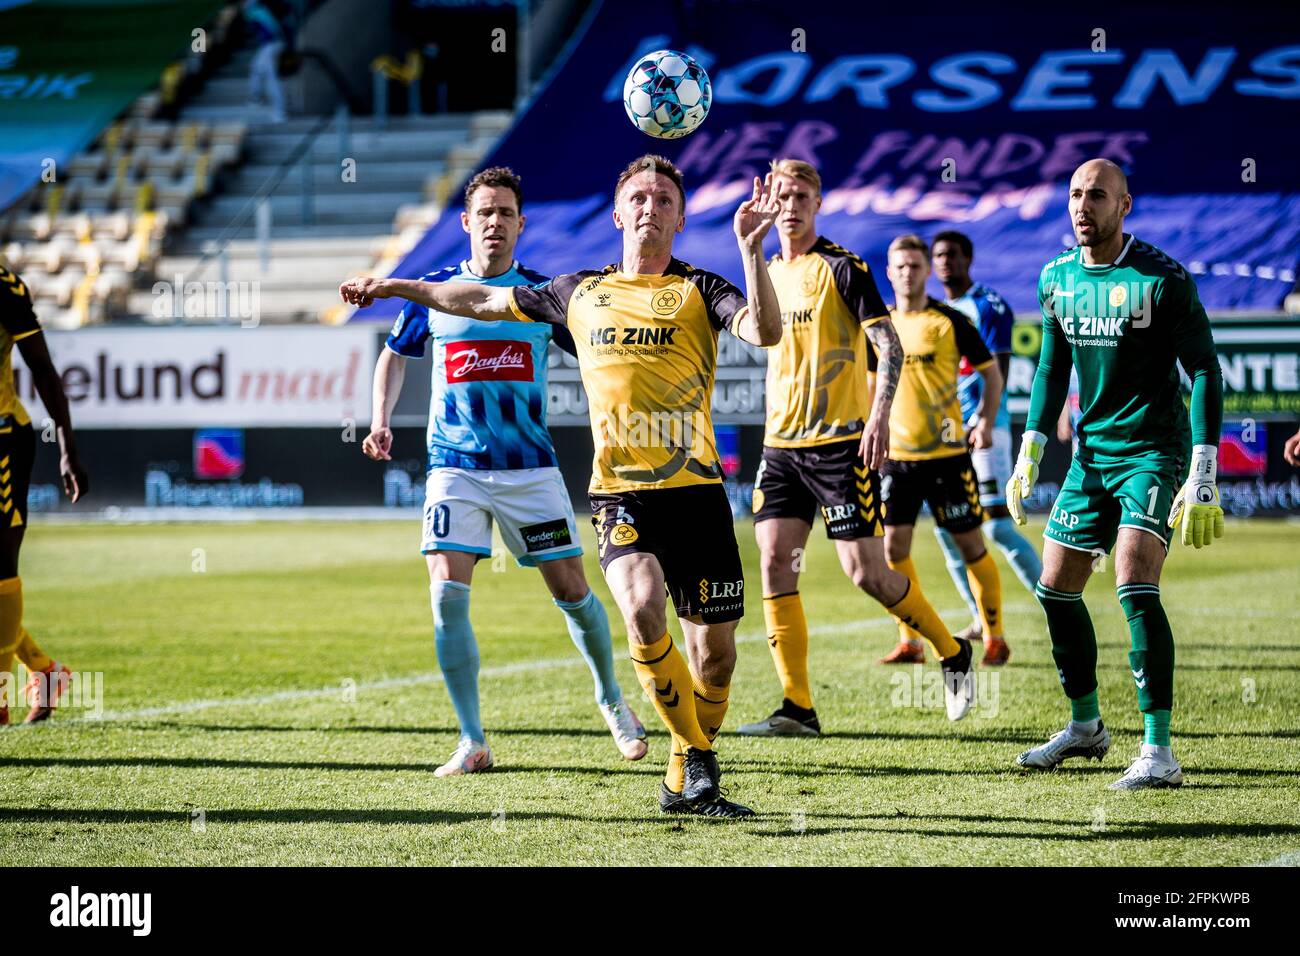 Denmark. 20th 2021. Soren Reese (5) of AC seen during the 3F Superliga match between AC Horsens and Soenderjyske at Casa Arena in Horsens. (Photo Credit: Gonzales Photo/Alamy Live